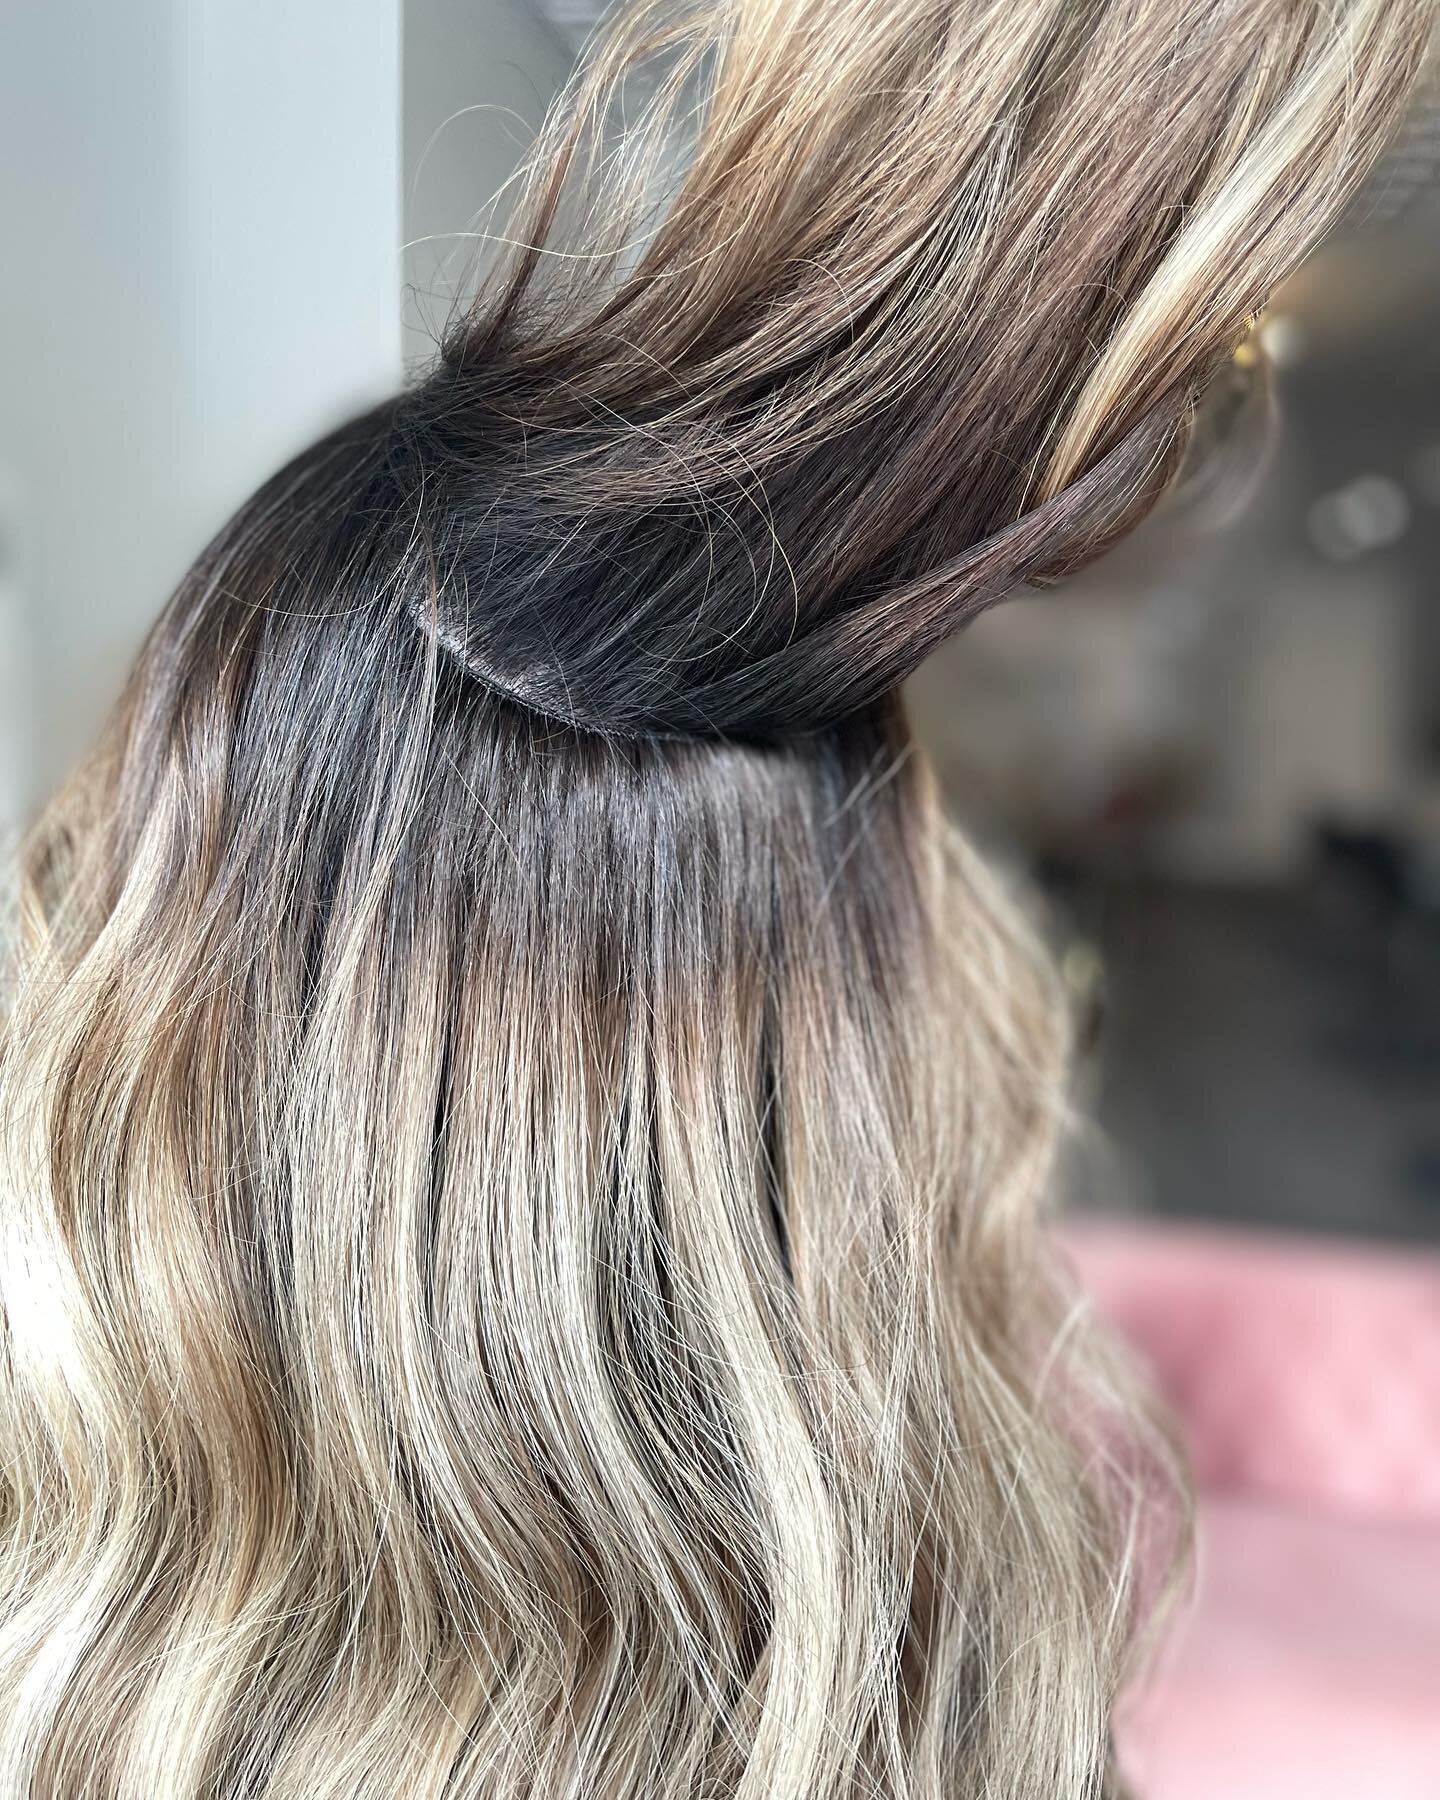 Struggling with your extensions showing? 

The intricate NBR process makes them almost undetectable. If your extensions aren&rsquo;t this hidden shoot us a message. We&rsquo;d love to help! 

#kansascity #kansascityhairstylist #kansascityhairextensio